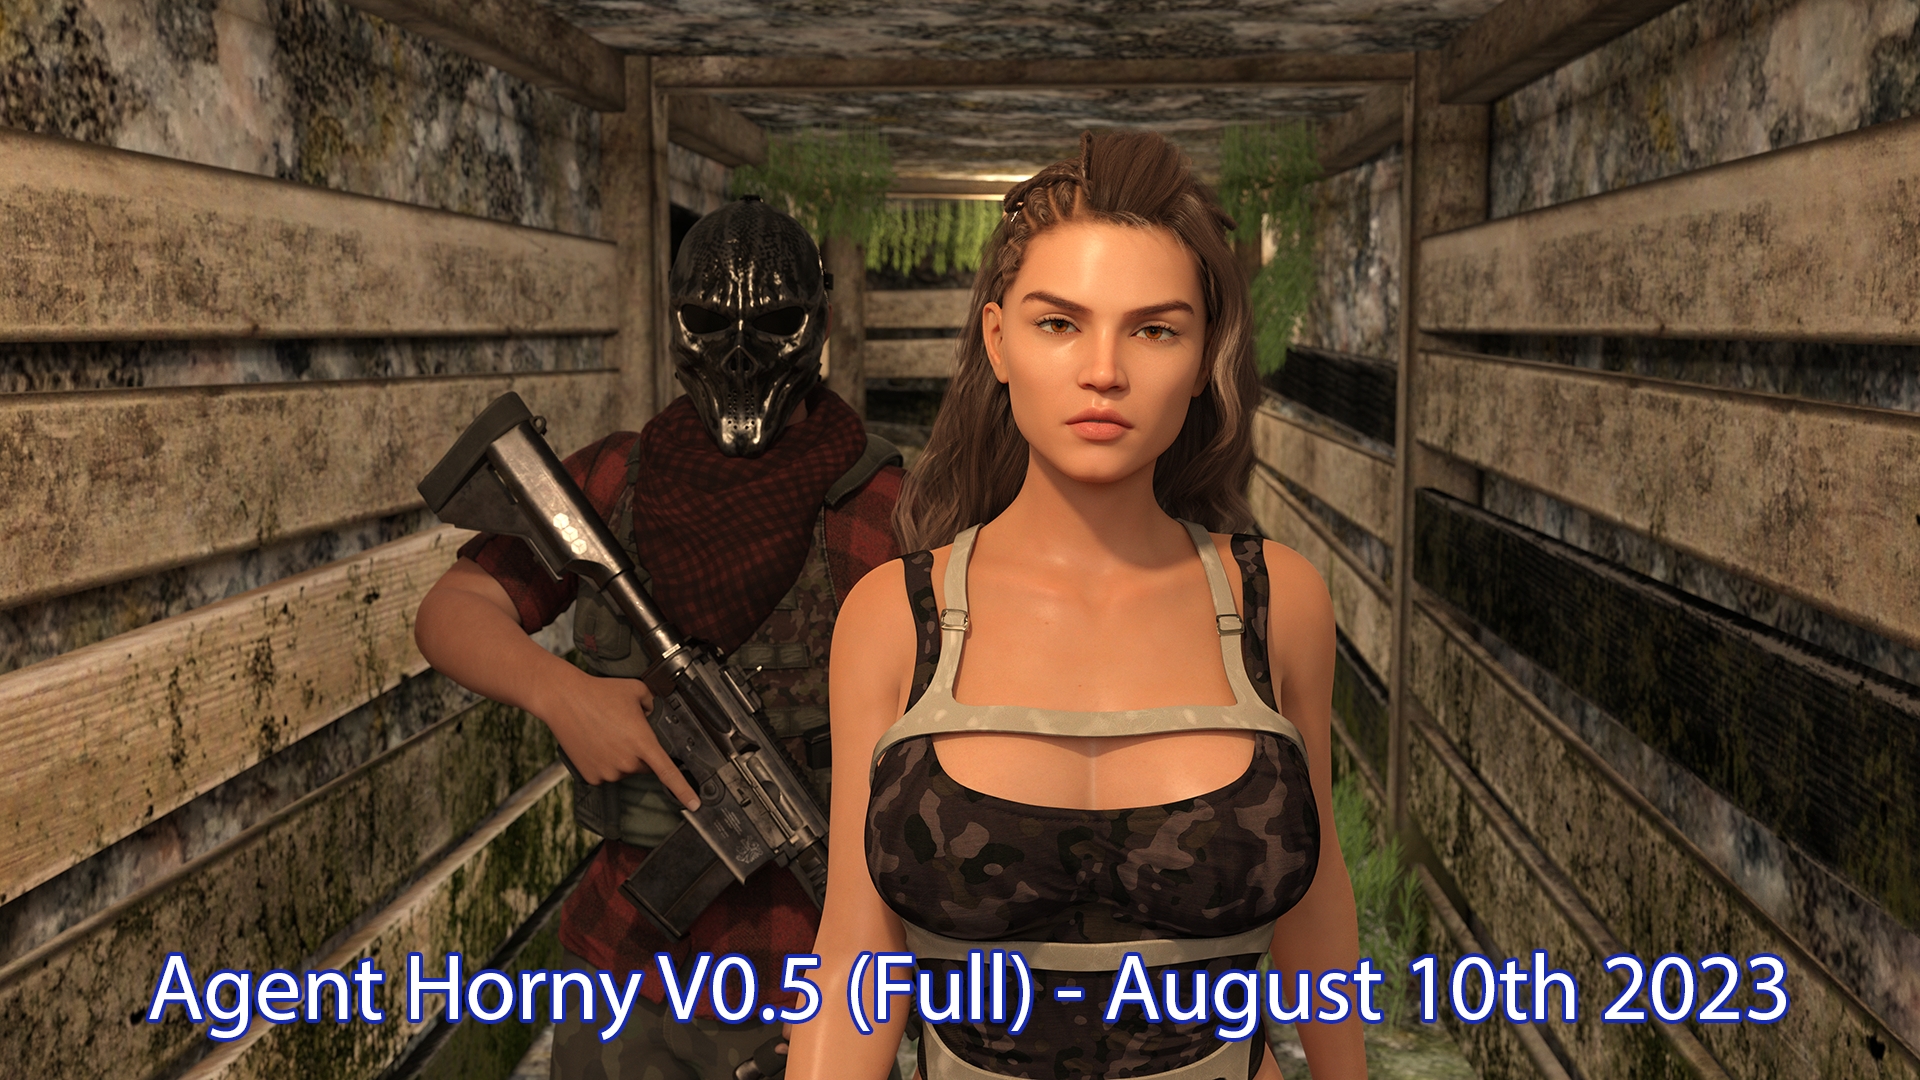 Agent Horny V0.5 (Full) - August 10th 2023  3d Porn 3d Girl Nsfw 3dnsfw Sexy Hot Nude Big boobs Pinup Pose Cute Teen